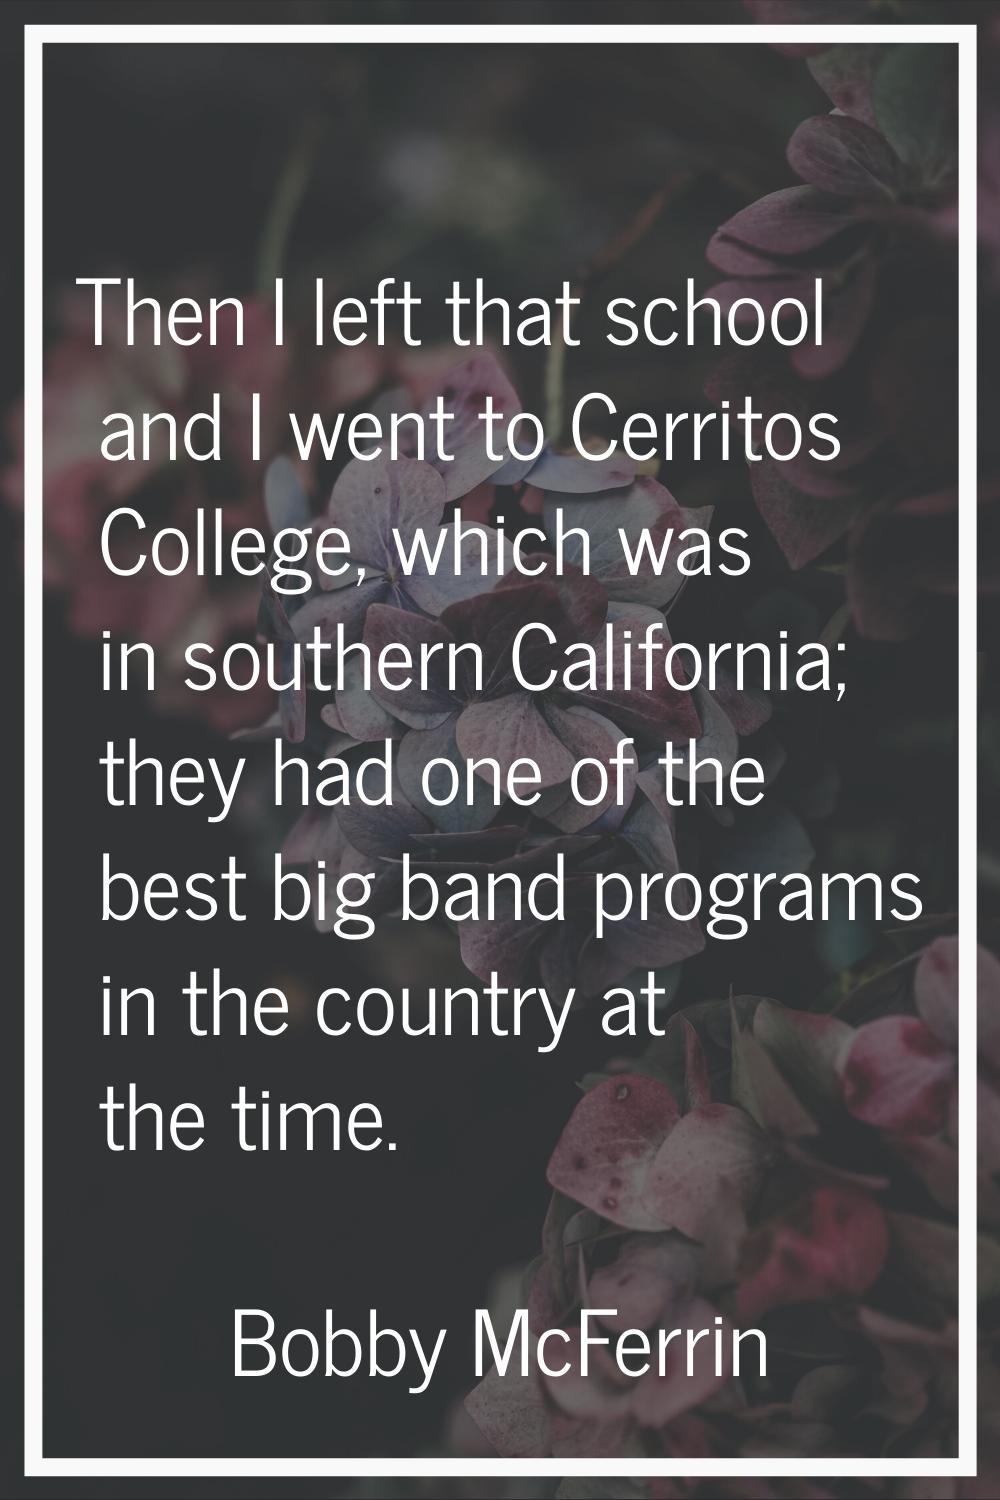 Then I left that school and I went to Cerritos College, which was in southern California; they had 